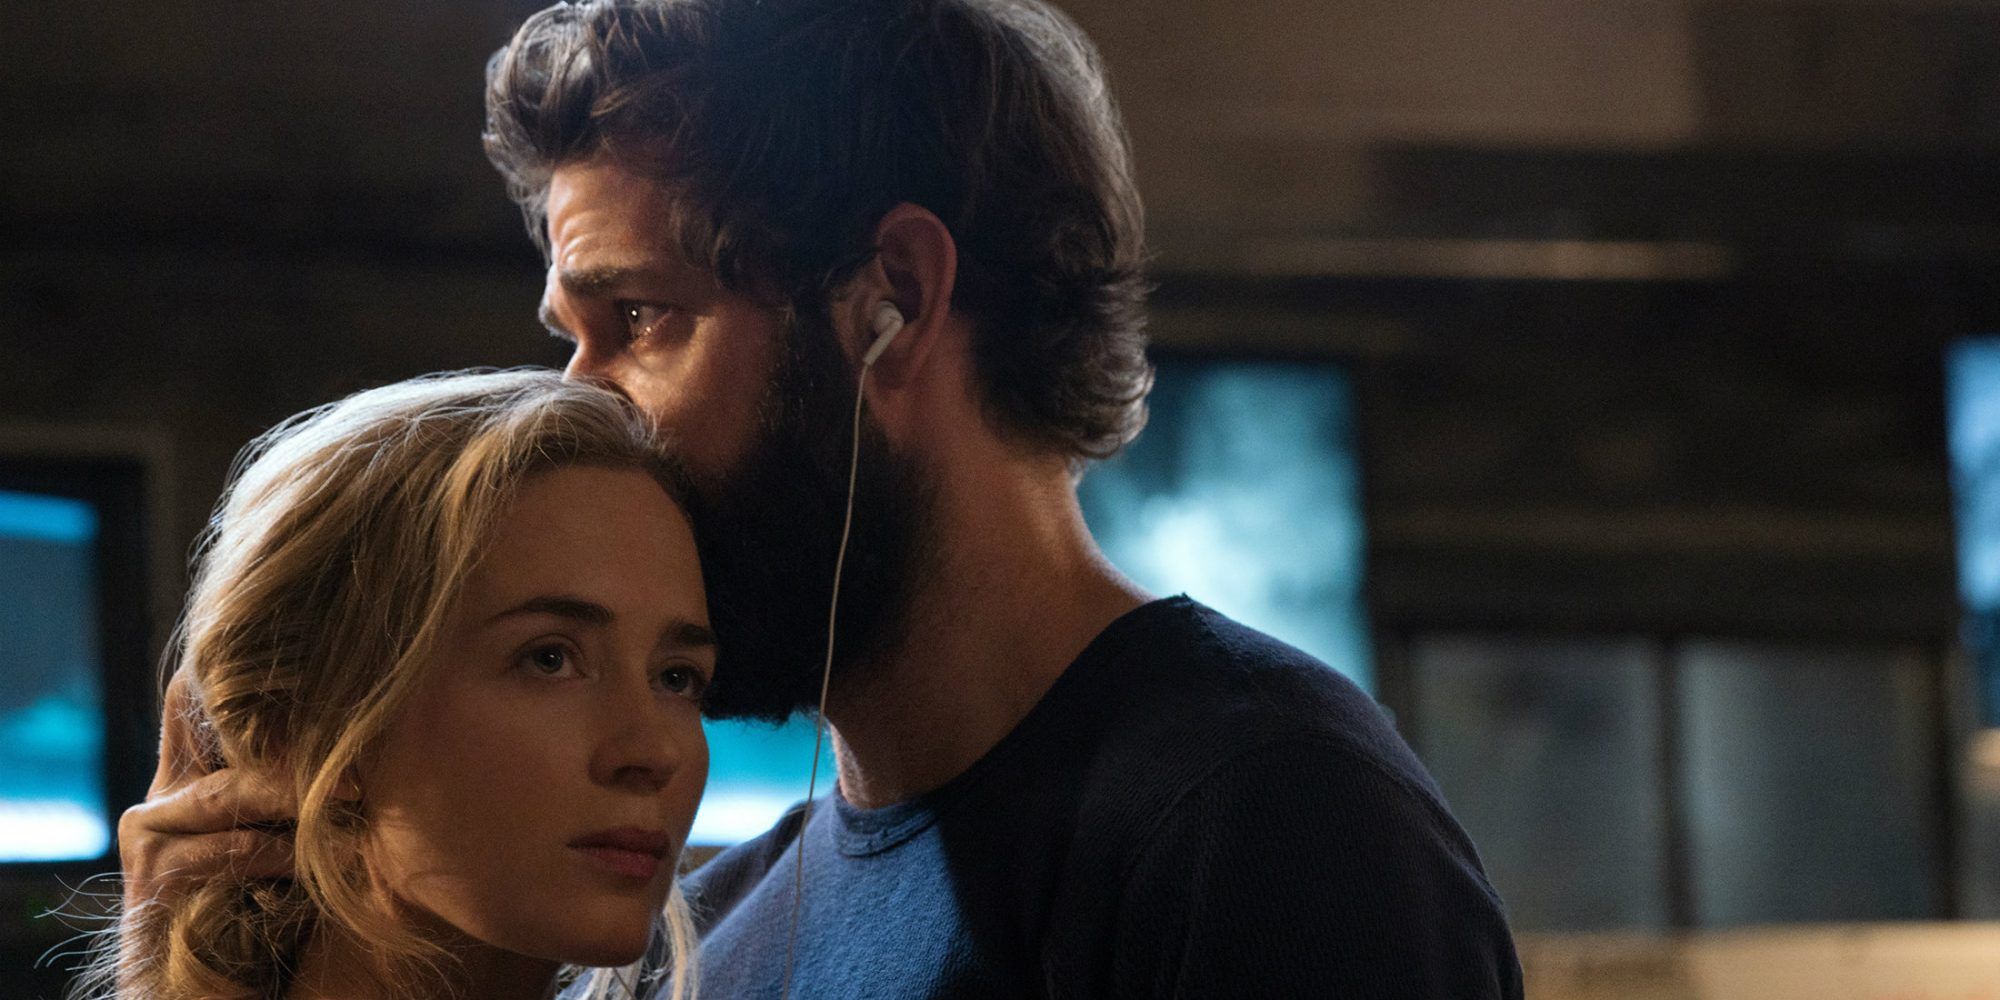 Emily Blunt and John Krasinski in A Quiet Place